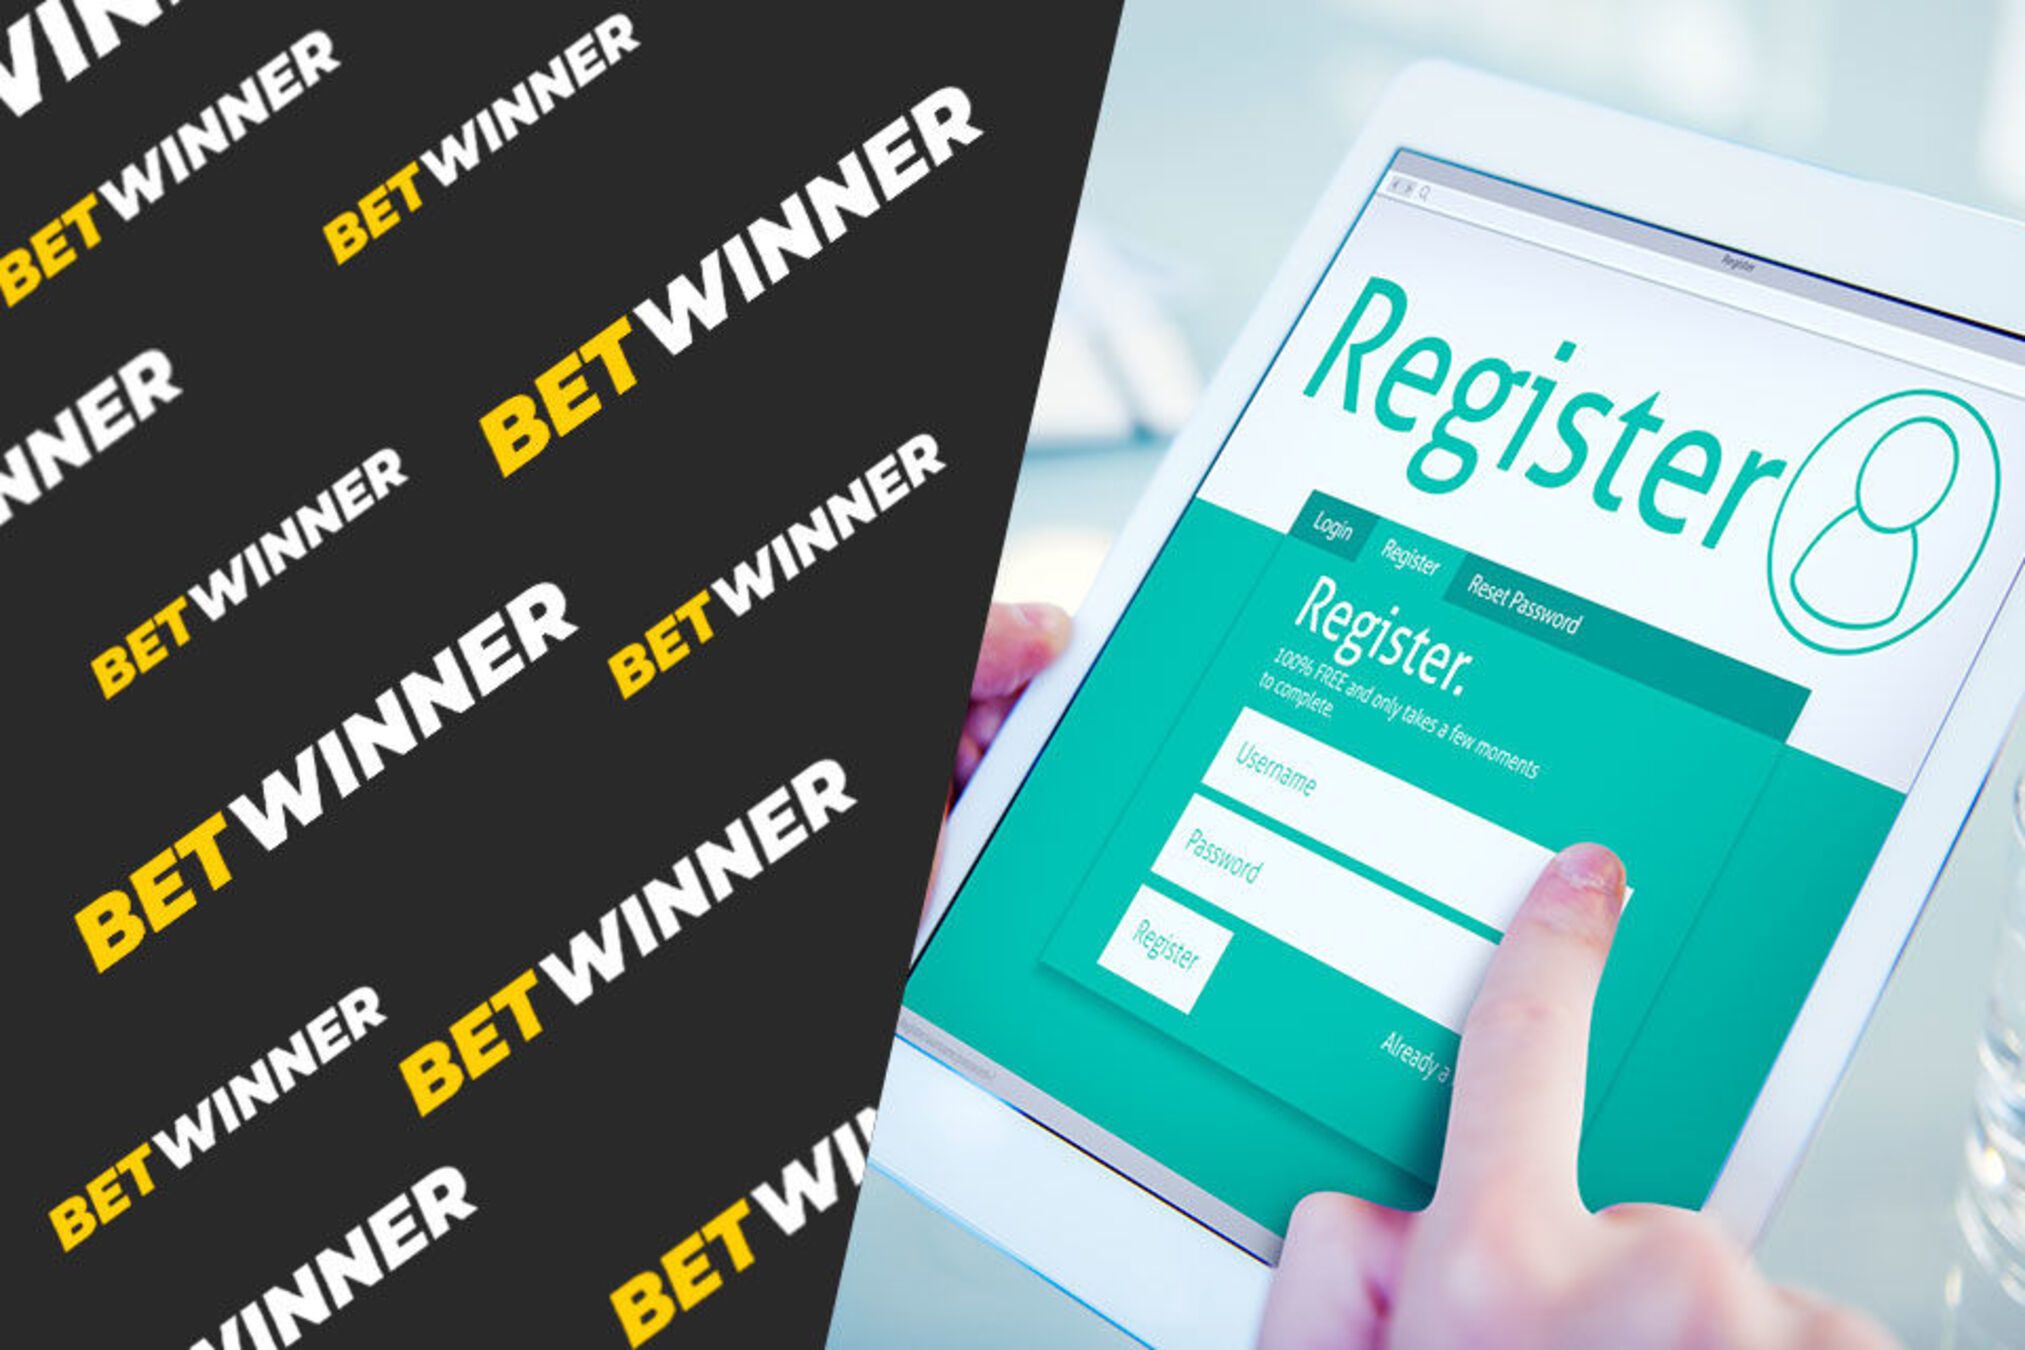 Betwinner Mobile Registration: Keep It Simple And Stupid